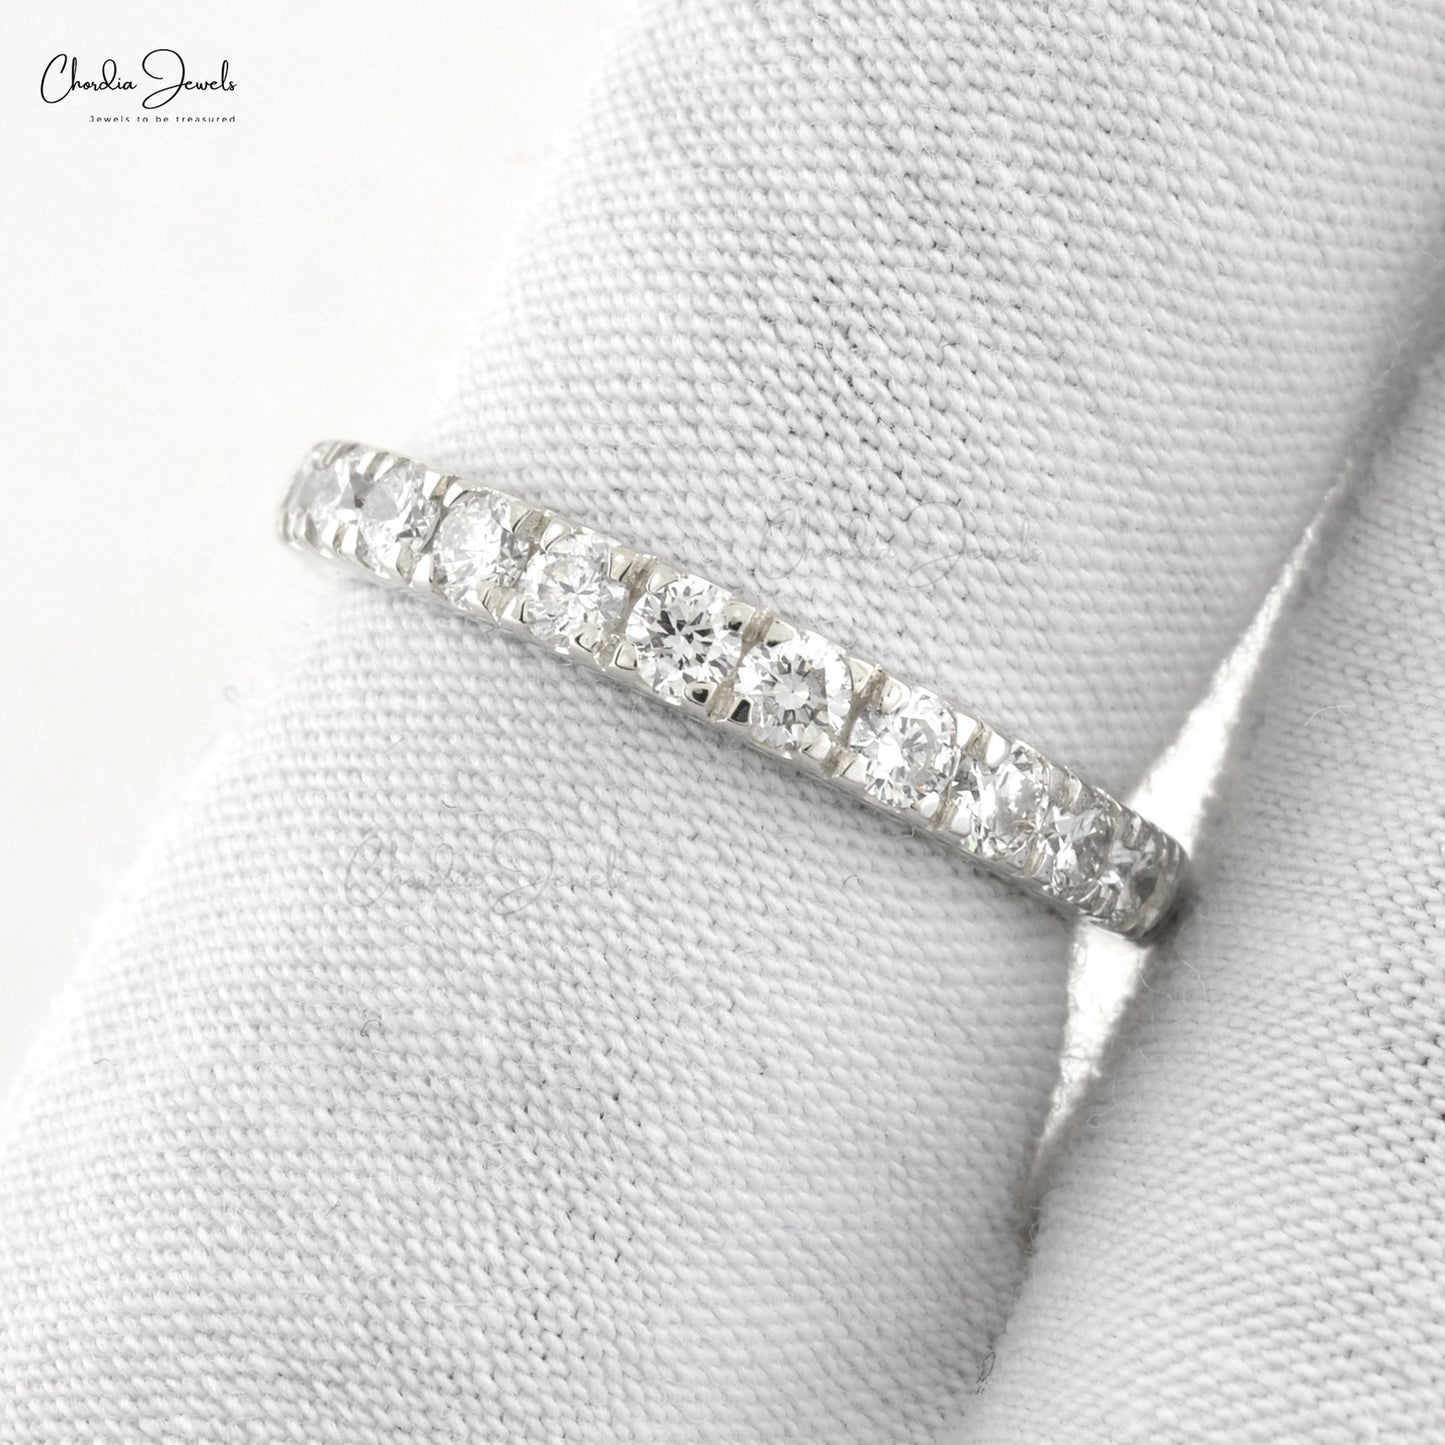 Best Selling Classics Design Genuine Certified Diamond Engagement Ring 14k Real White Gold Hallmarked Jewelry For Gift